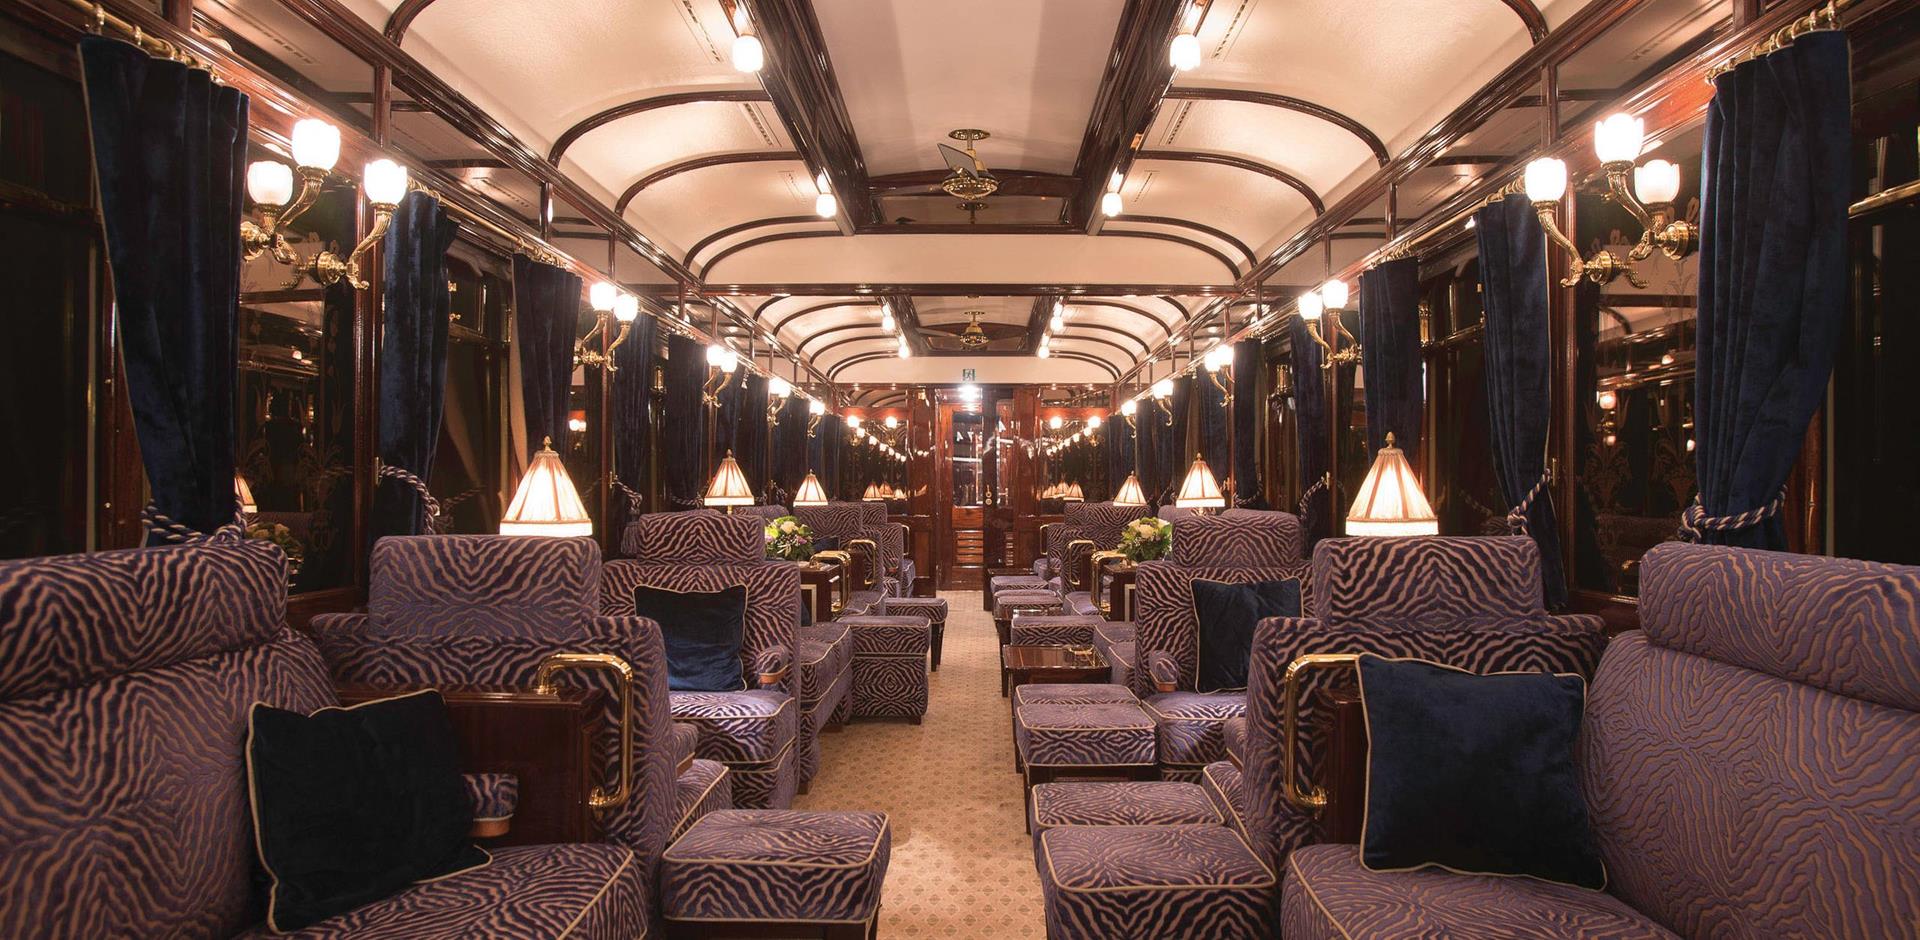 All aboard: Historical Orient Express train reaches Istanbul